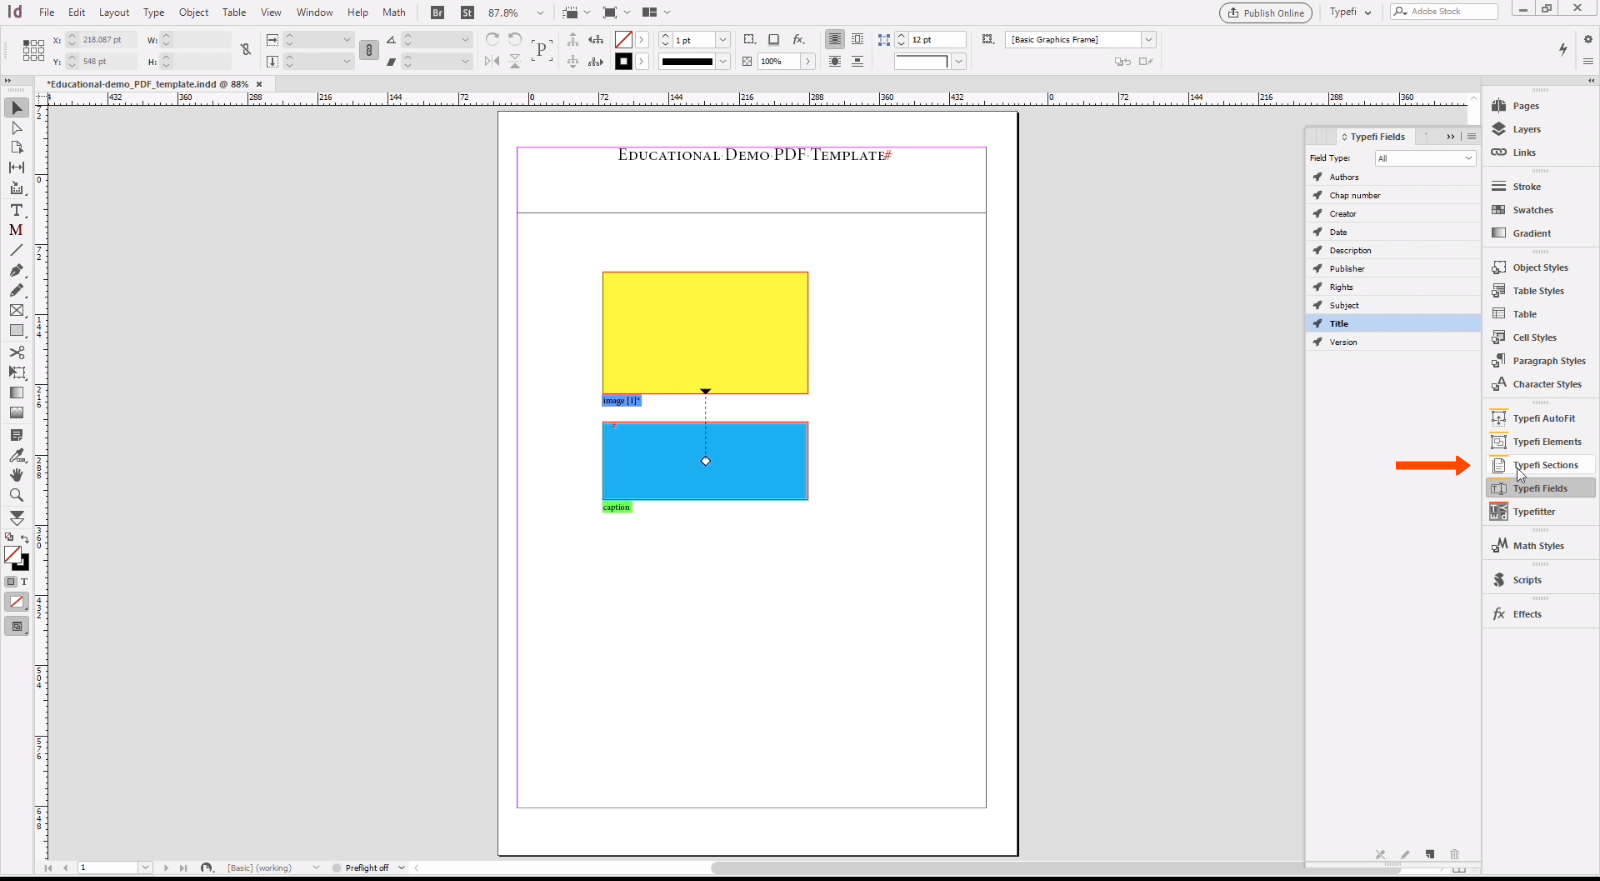 InDesign interface with template open and an arrow pointing to the Typefi features